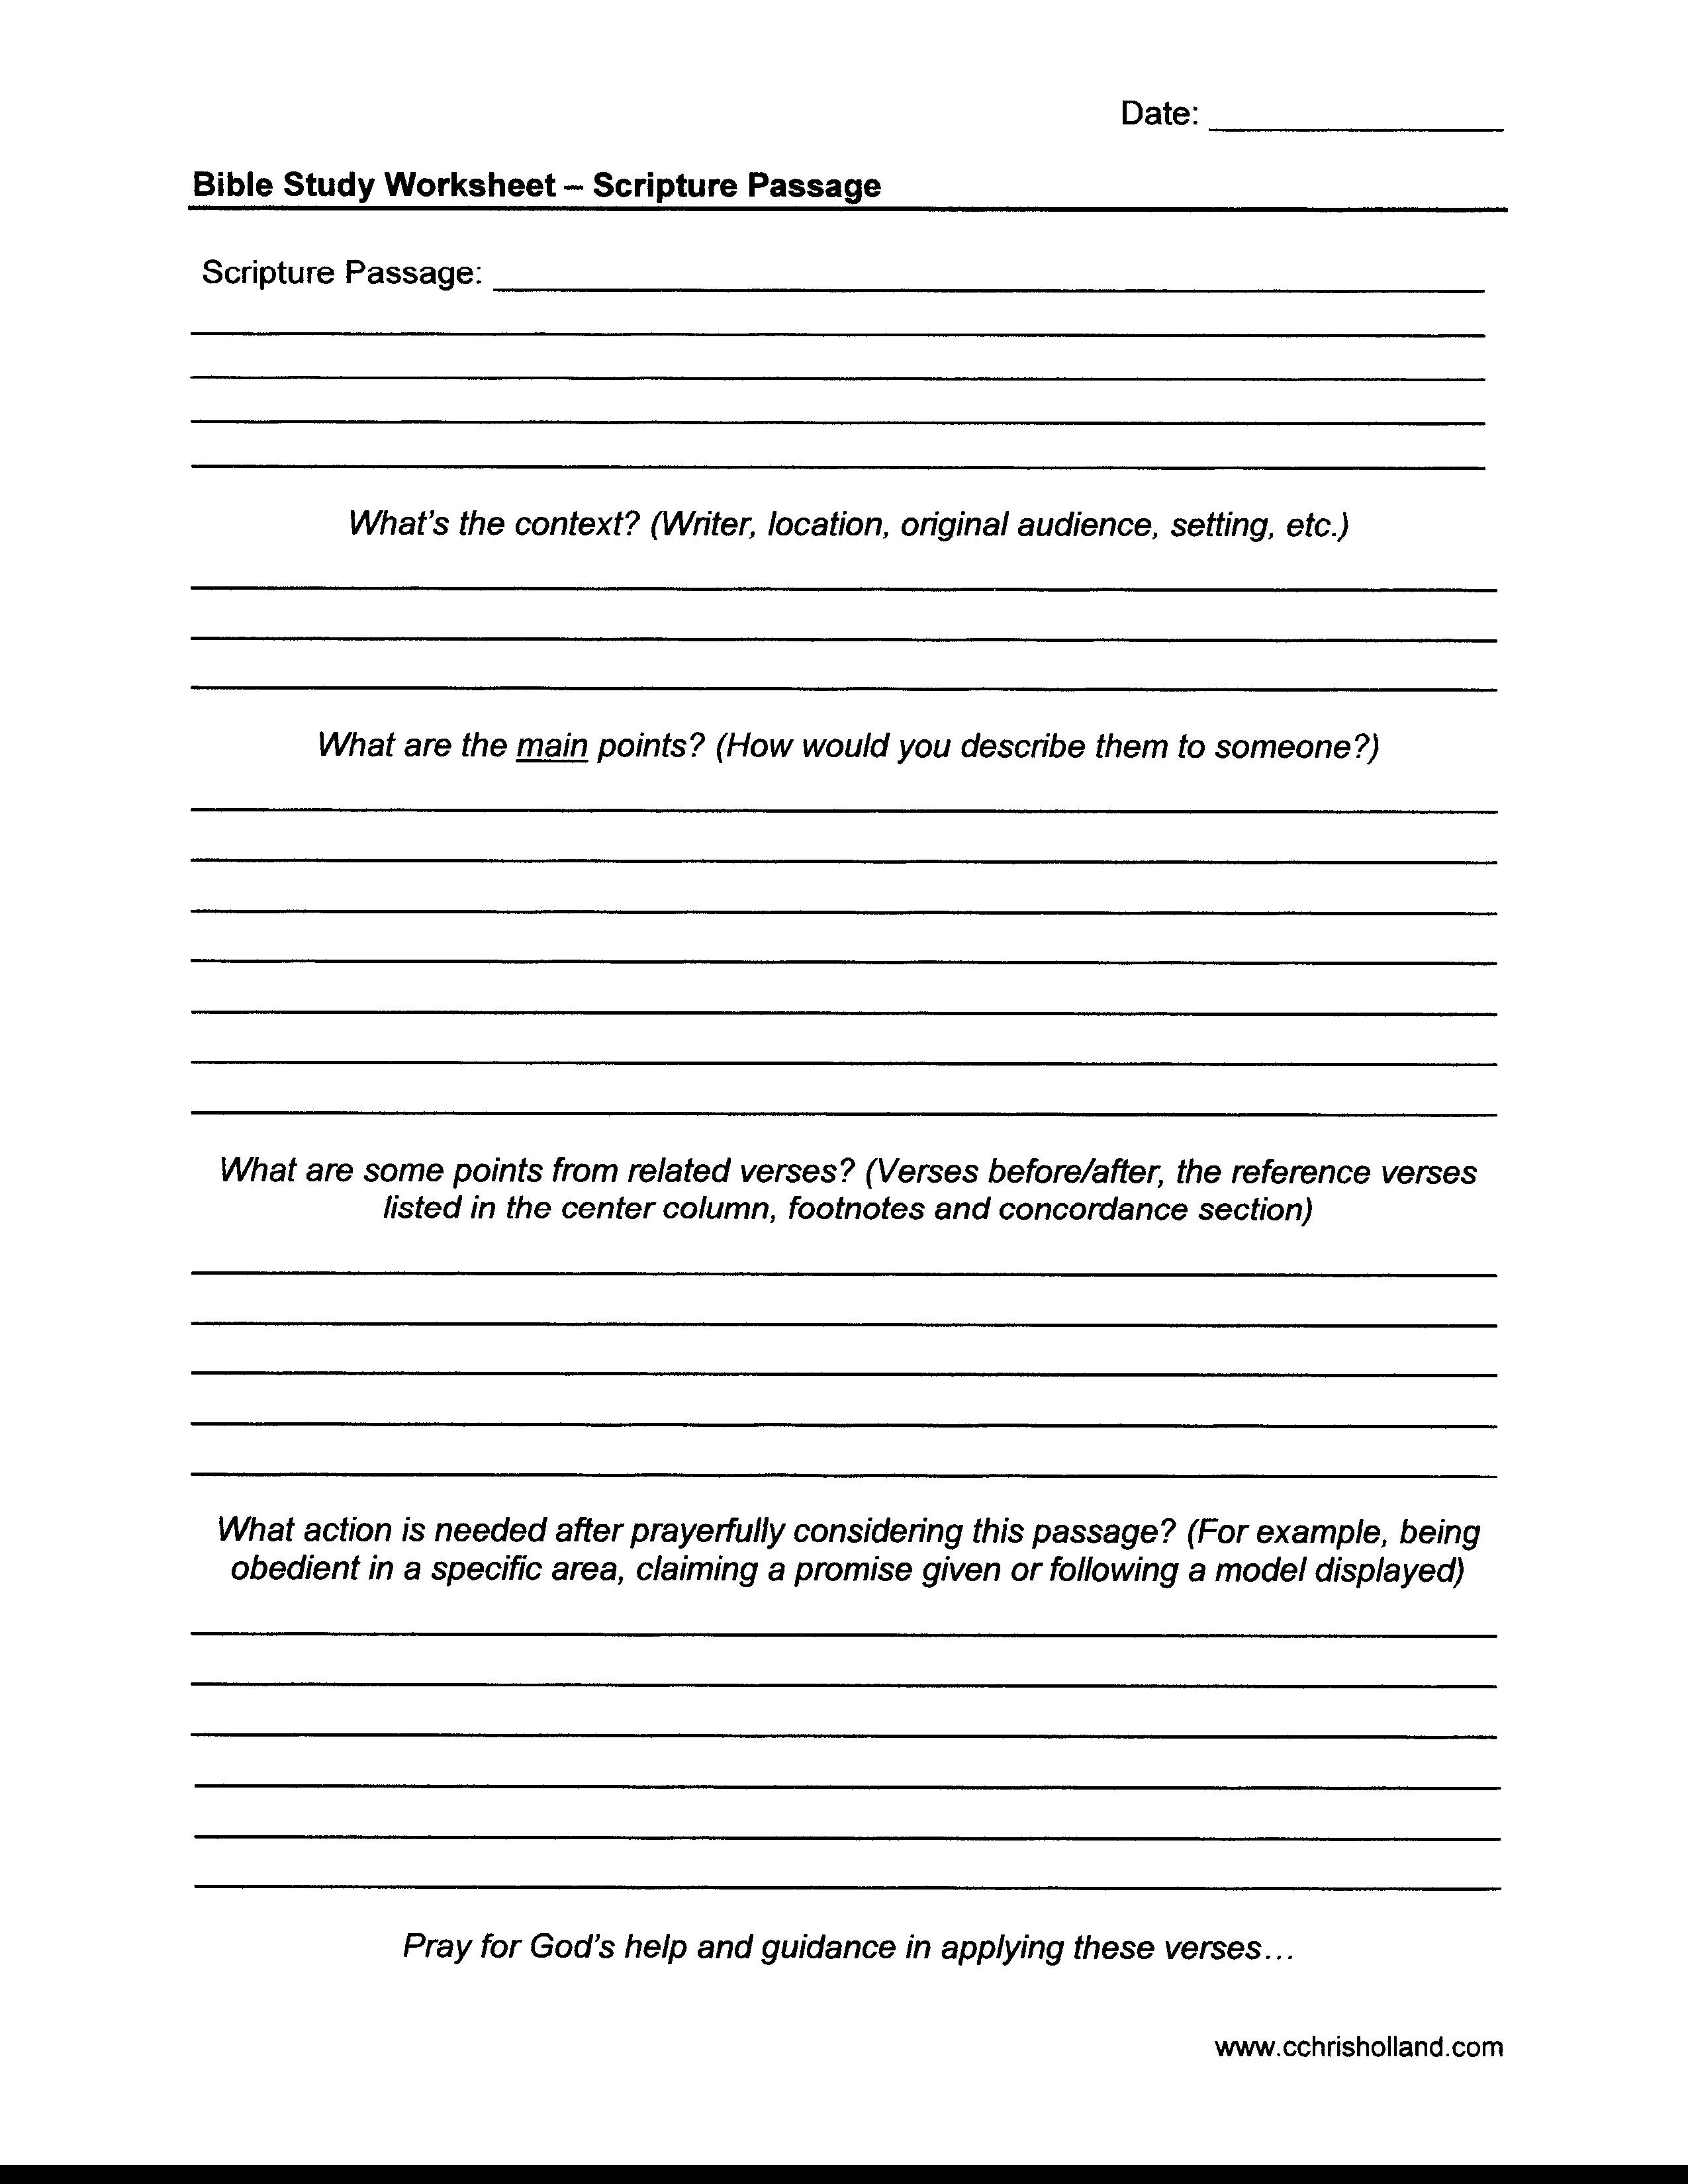 Printable Worksheets For Adults Bible Study